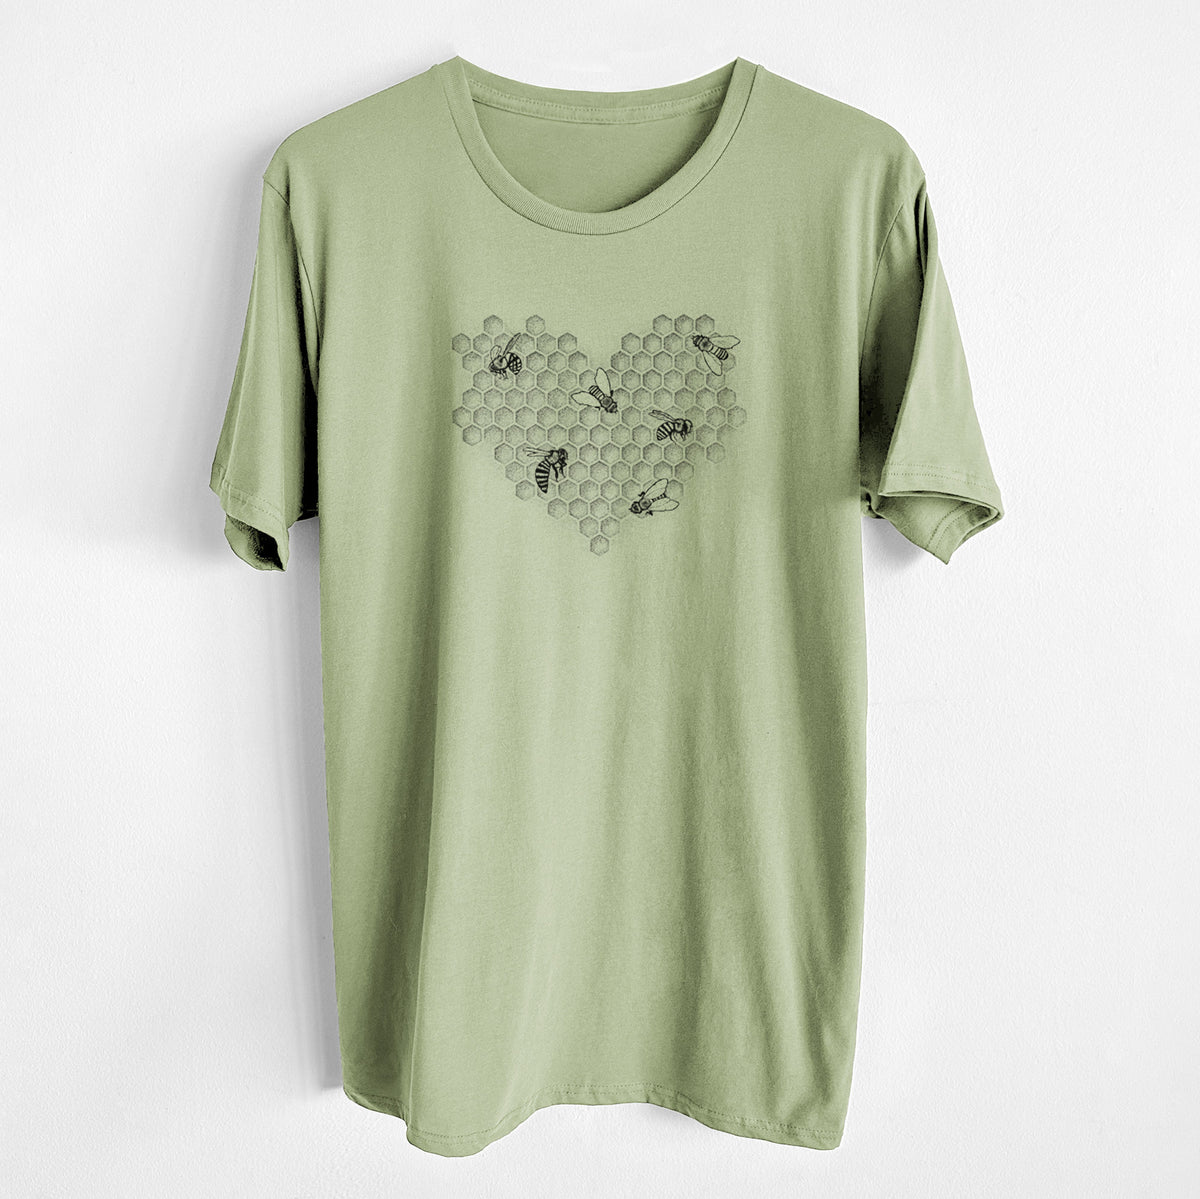 Honeycomb Heart with Bees - Unisex Crewneck - Made in USA - 100% Organic Cotton